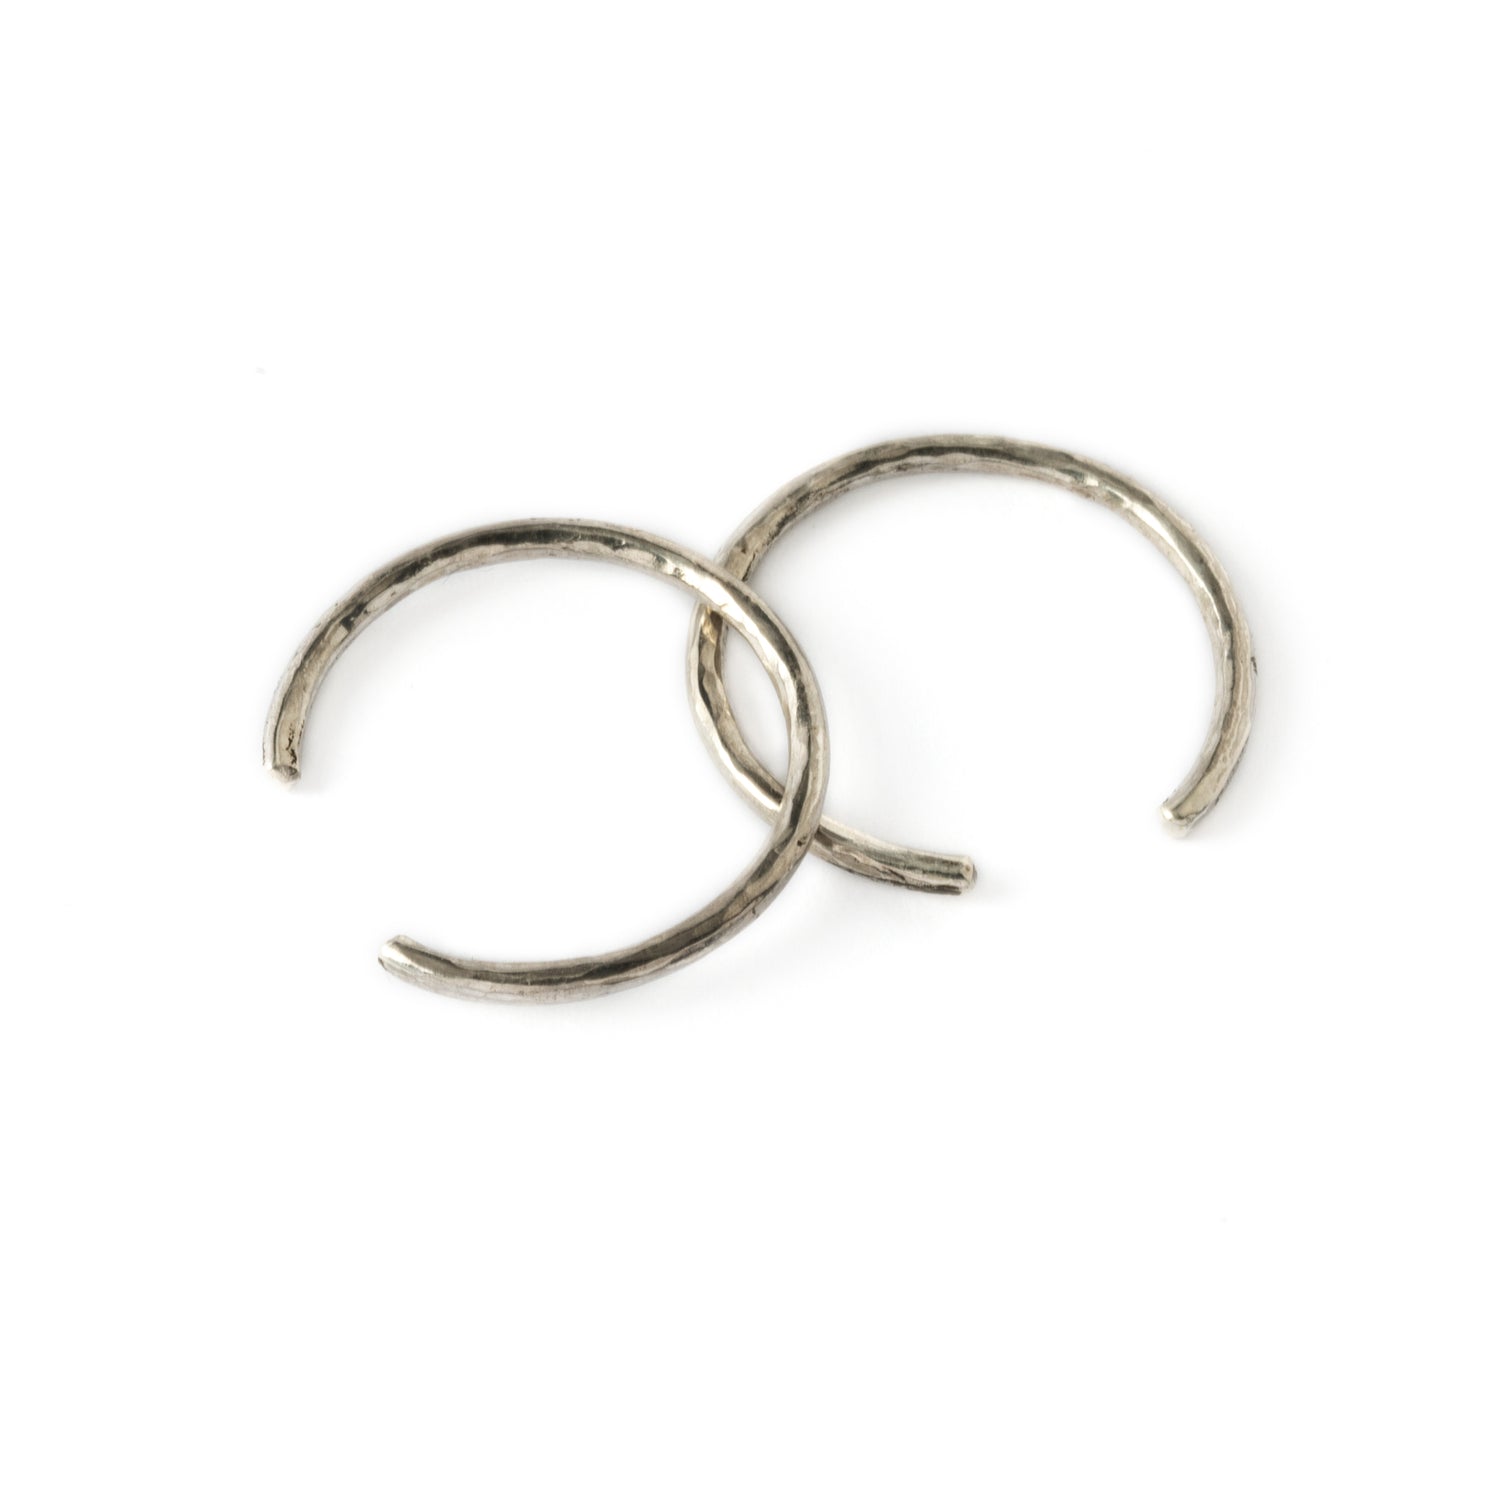 Hammered silver horseshoe earrings front and side view